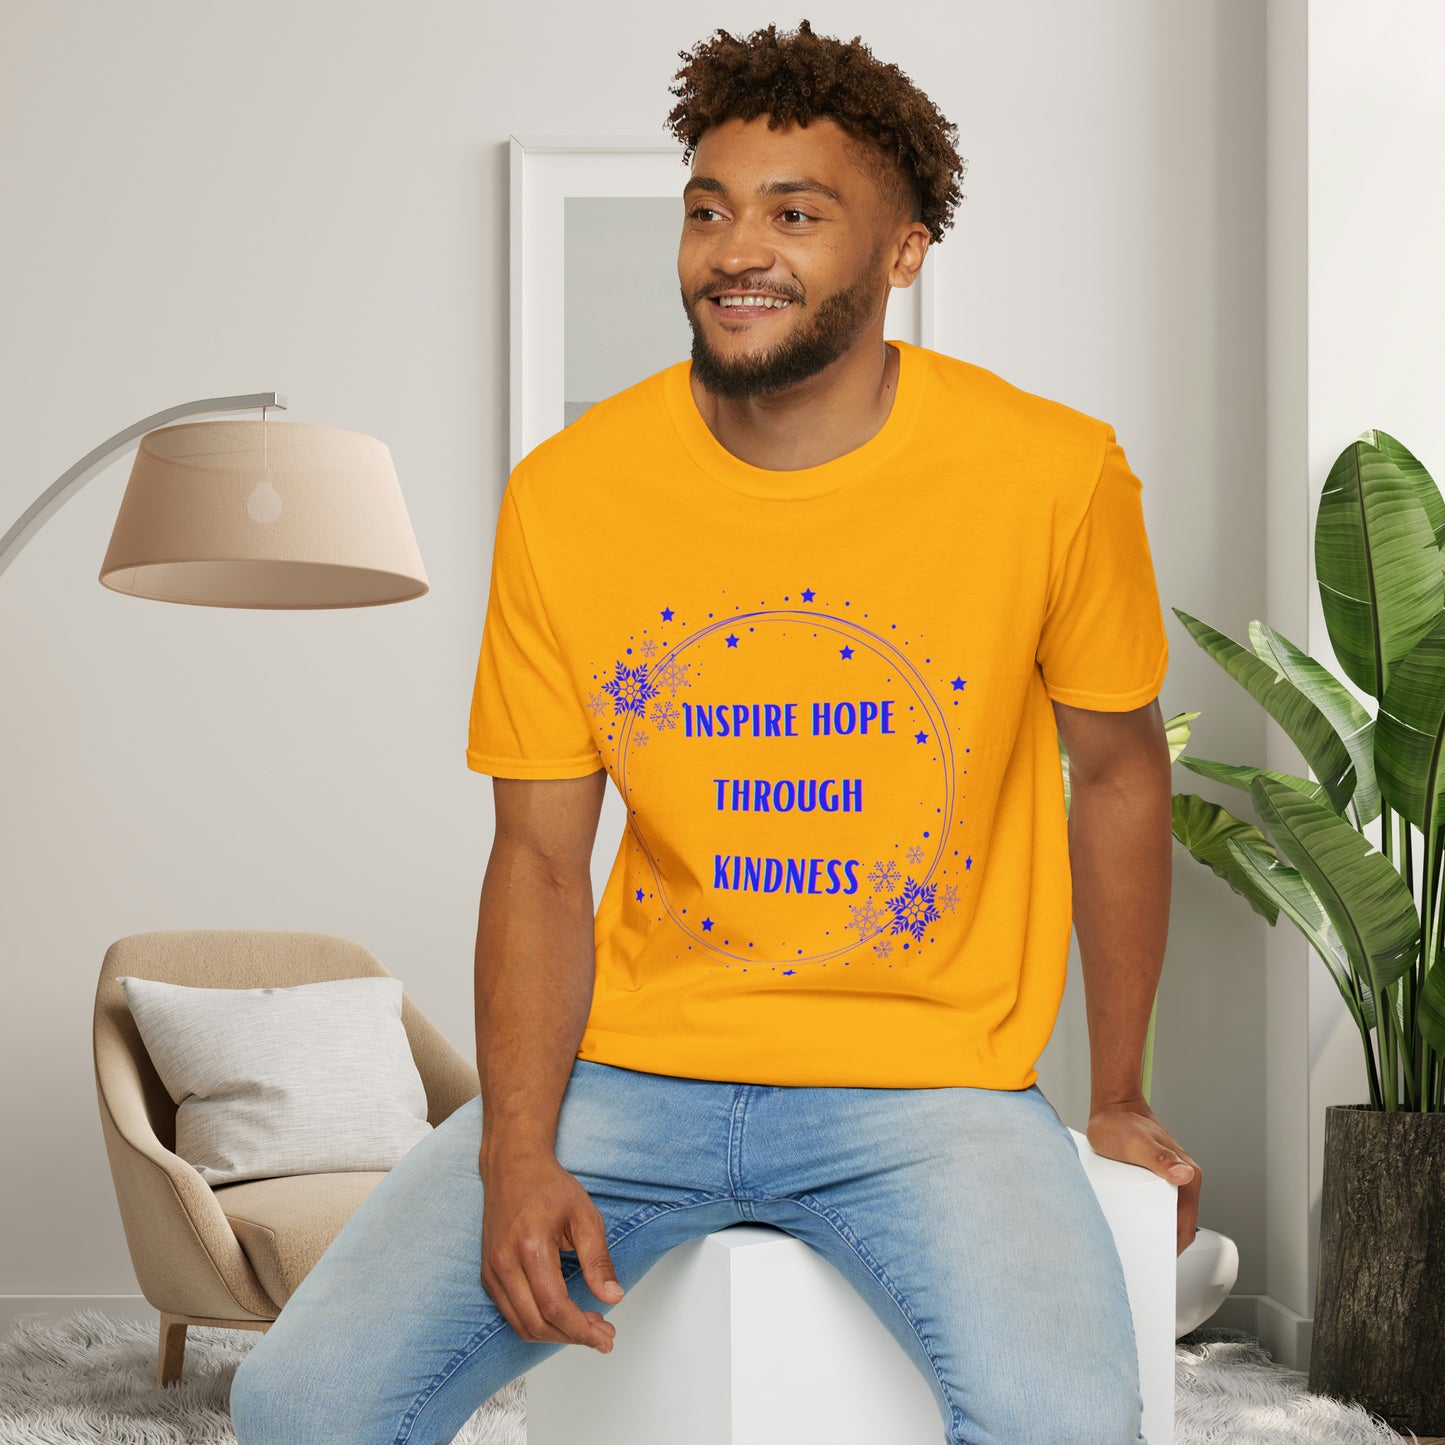 A message of “inspire hope through kindness” on this Unisex Softstyle T-Shirt.